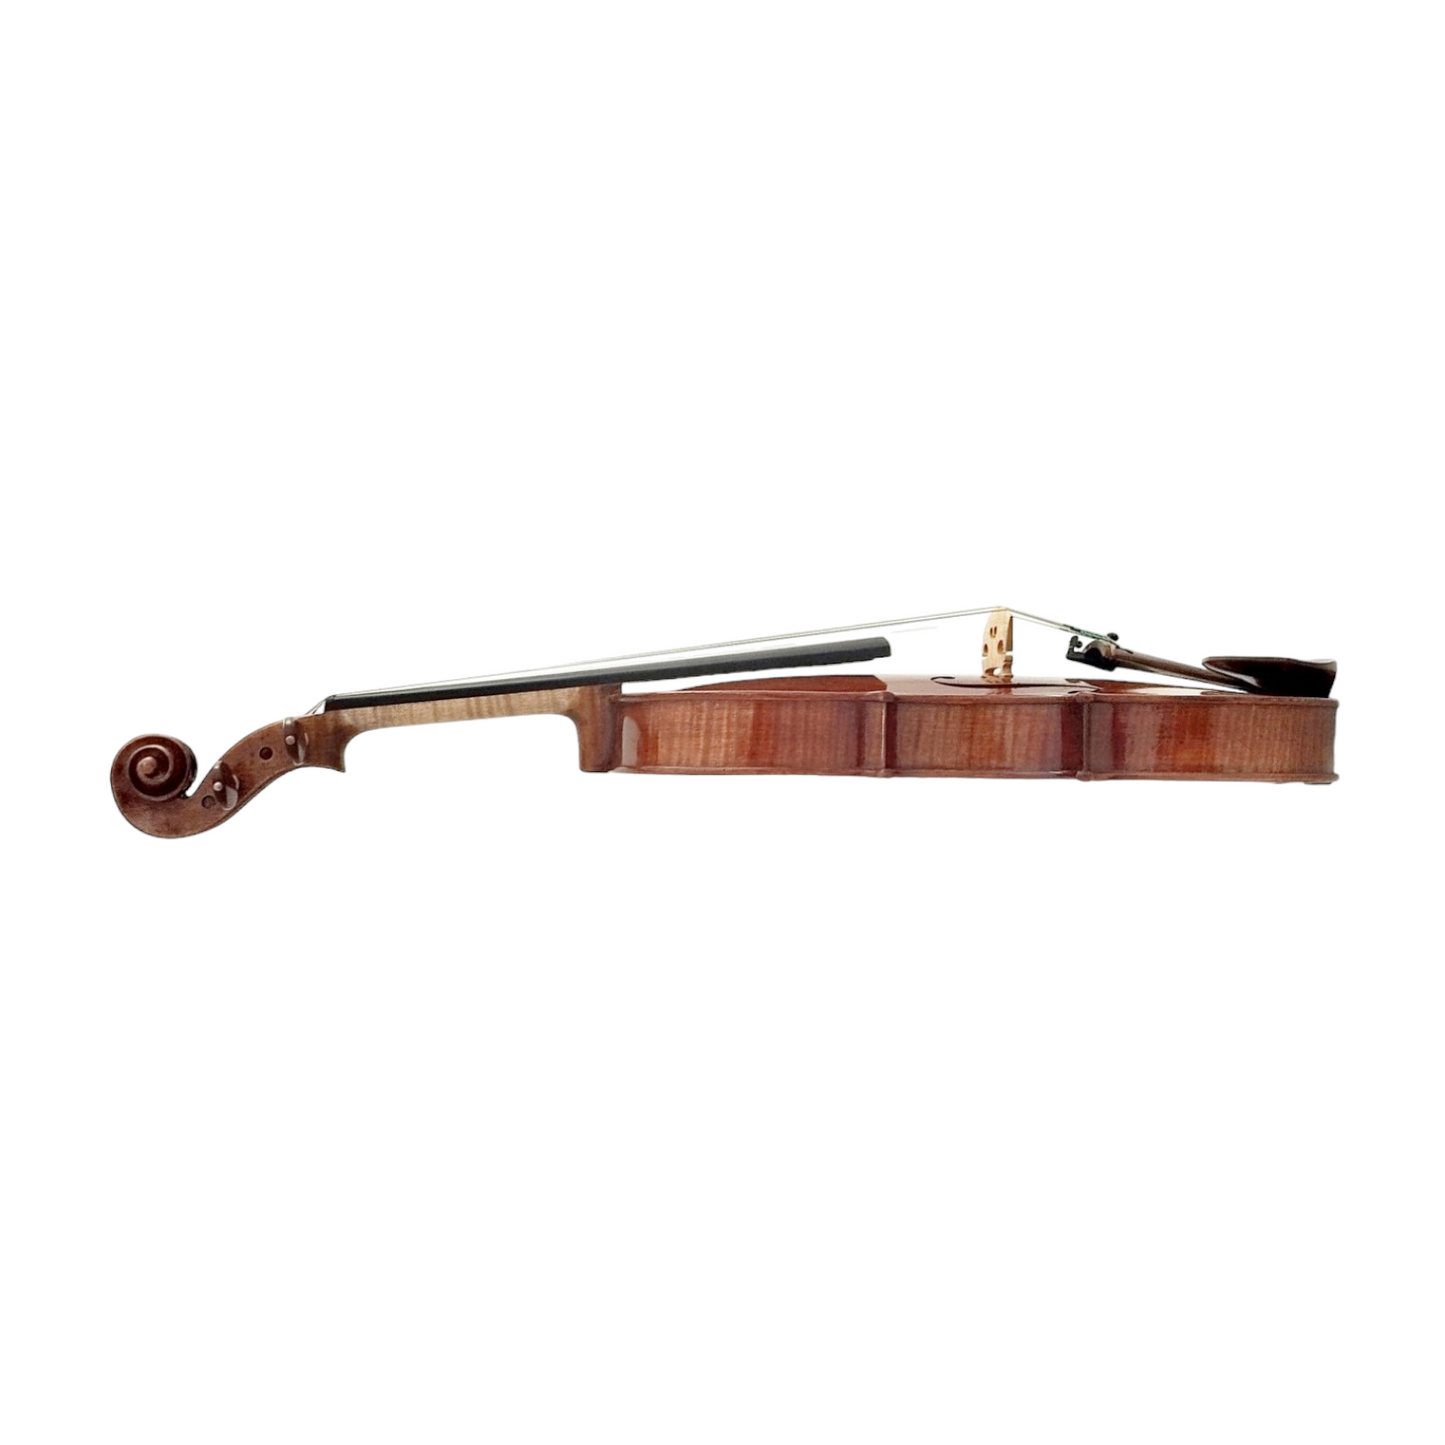 Echoes of Elegance, The PVE200 Symphony Violin